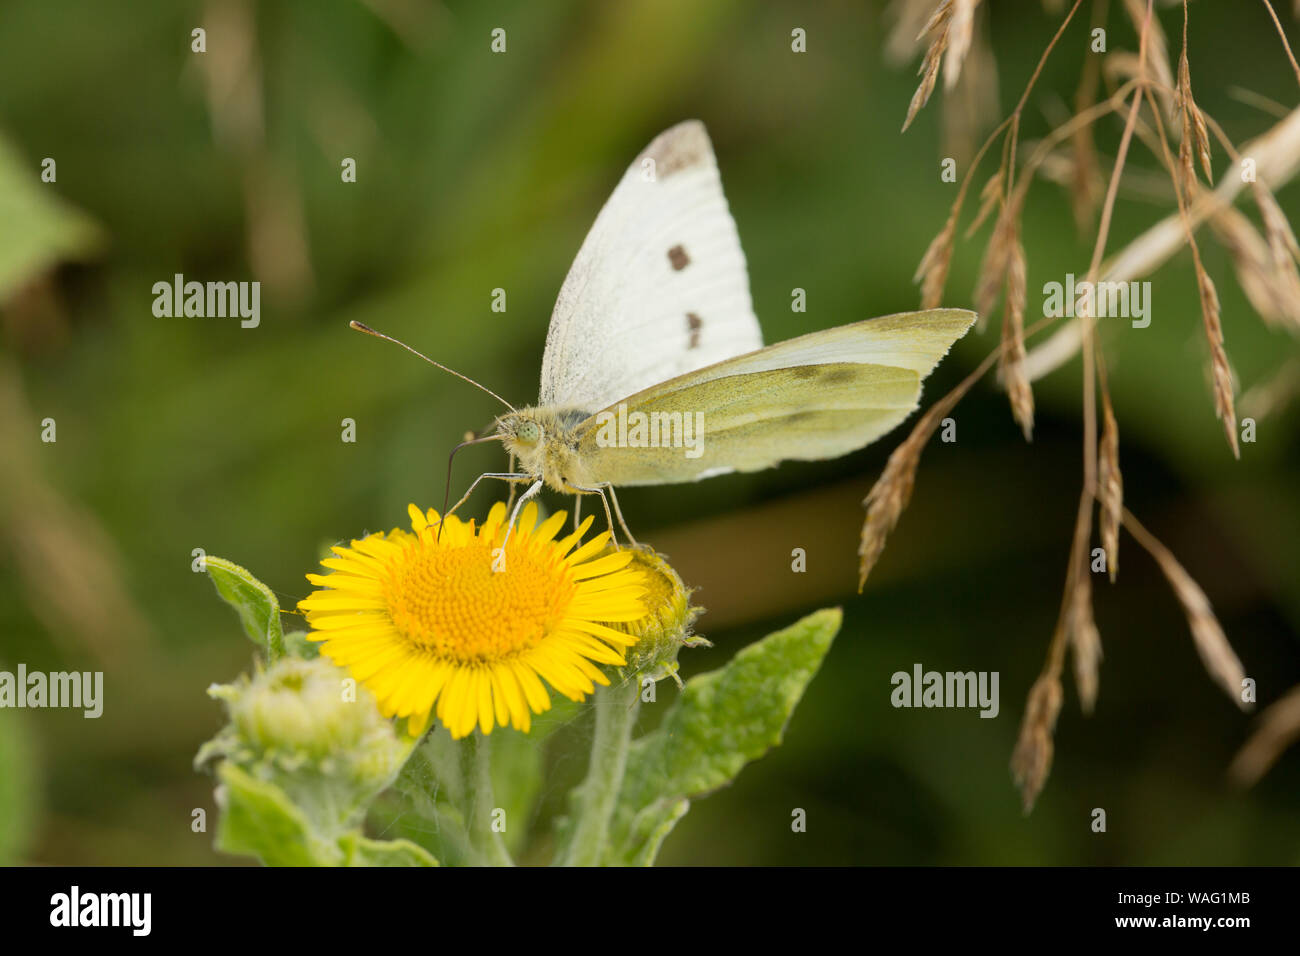 A female Large White butterfly, Pieris brassicae on a sunny day in August feeding on Common Fleabane, Pulicaria dysenterica. North Dorset England UK G Stock Photo